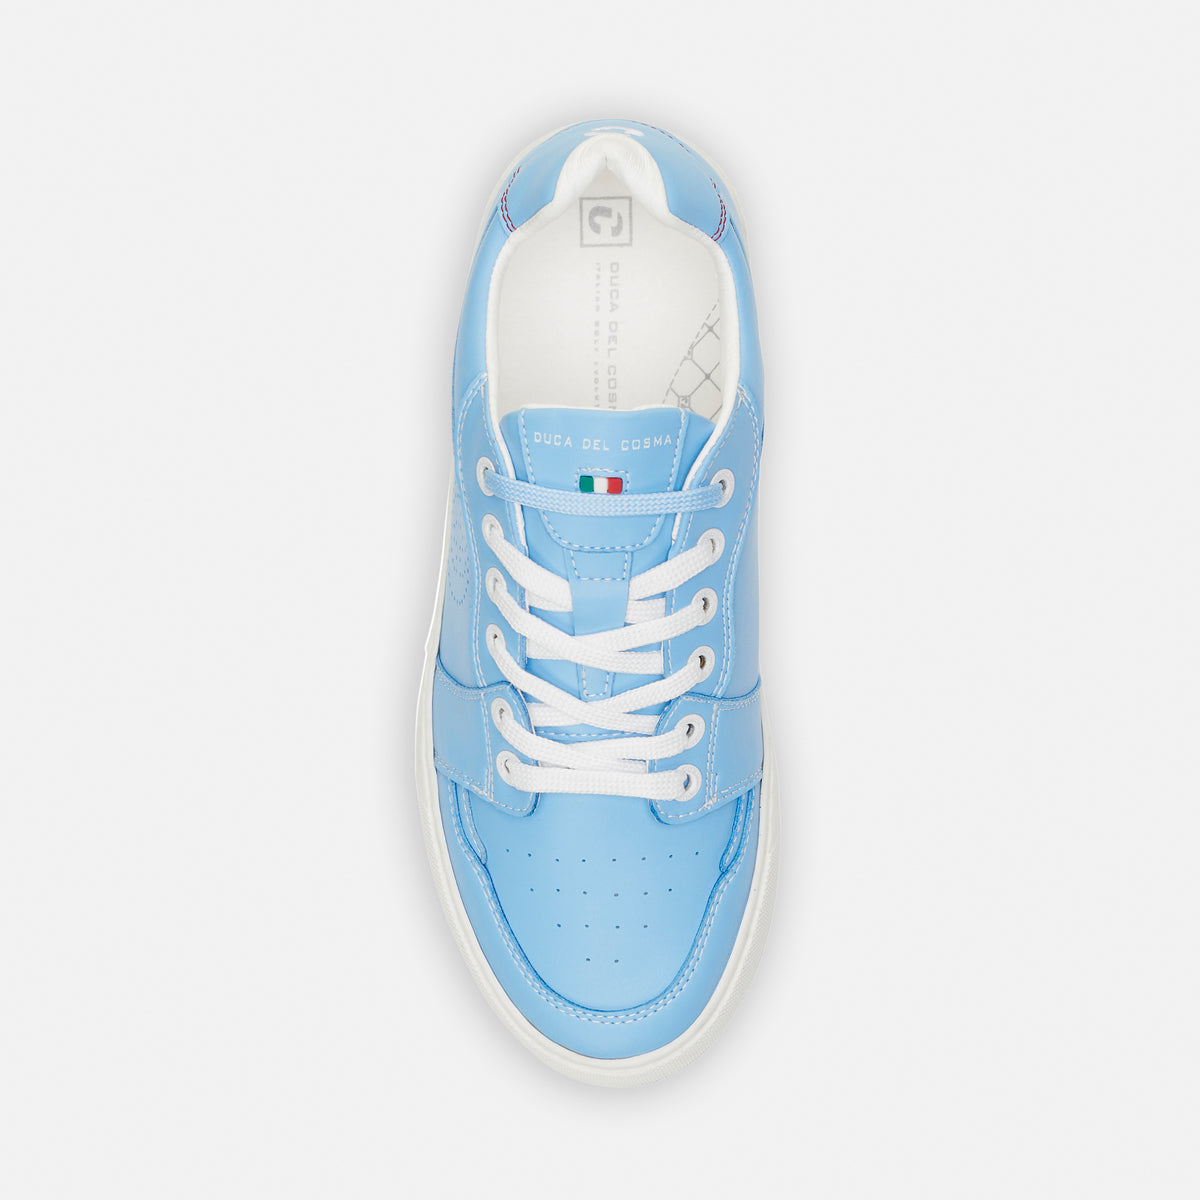 Duca del Cosma Giordana Light Blue golf shoe for women's is a sportive and stylish golf shoe